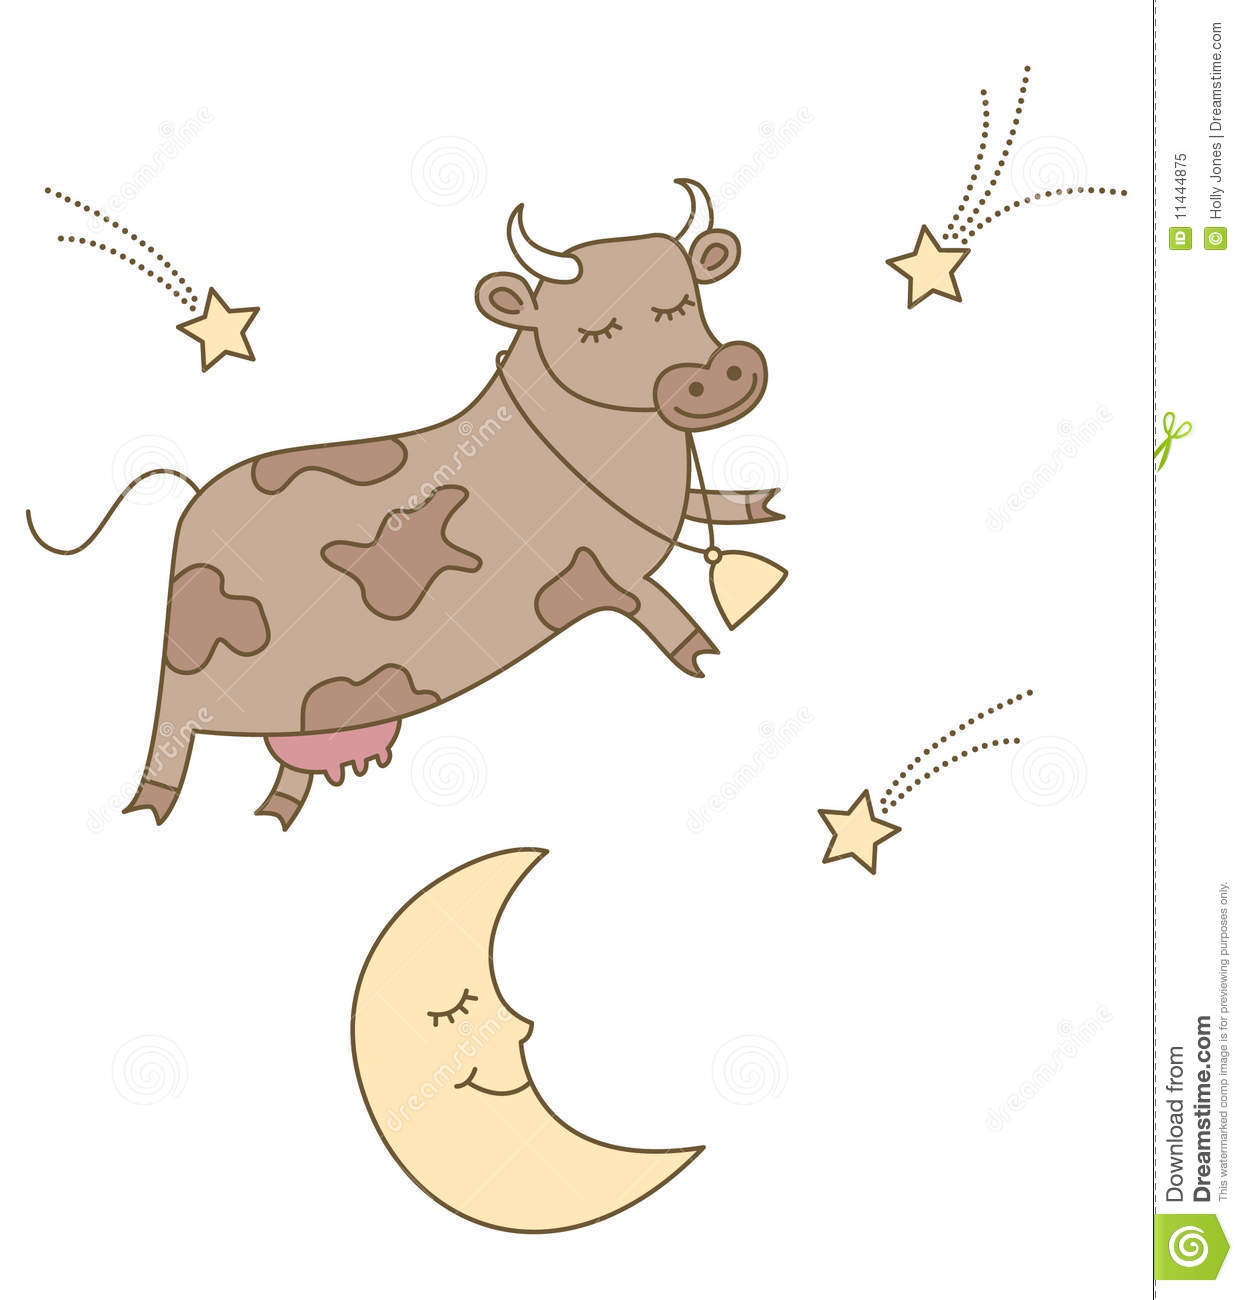 The Cow Jumped Over The Moon Royalty Free Stock Photo   Image